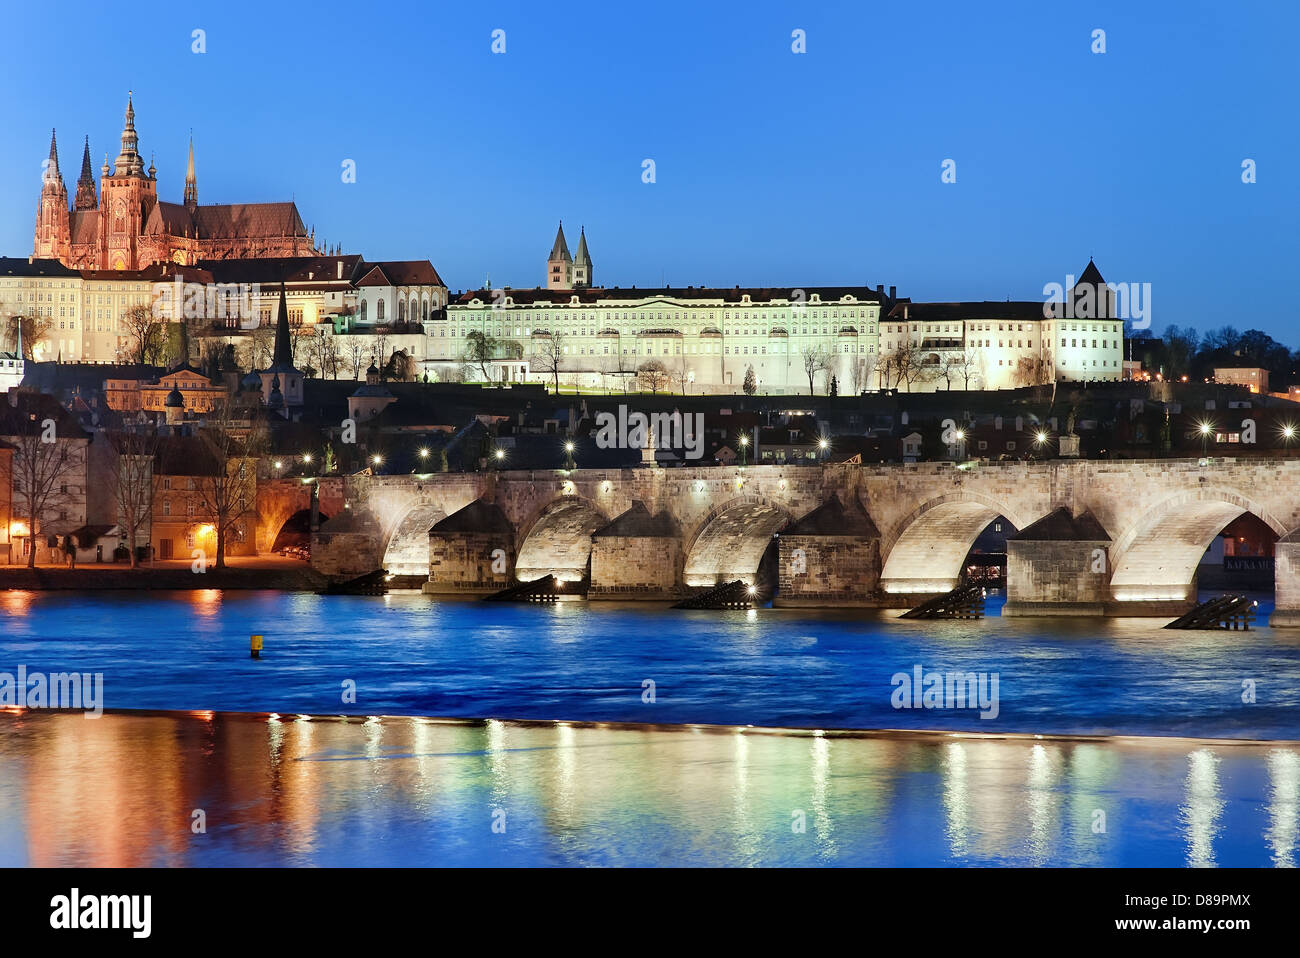 Charles Bridge and Vltava river by night, in the background the castle, Prague Stock Photo